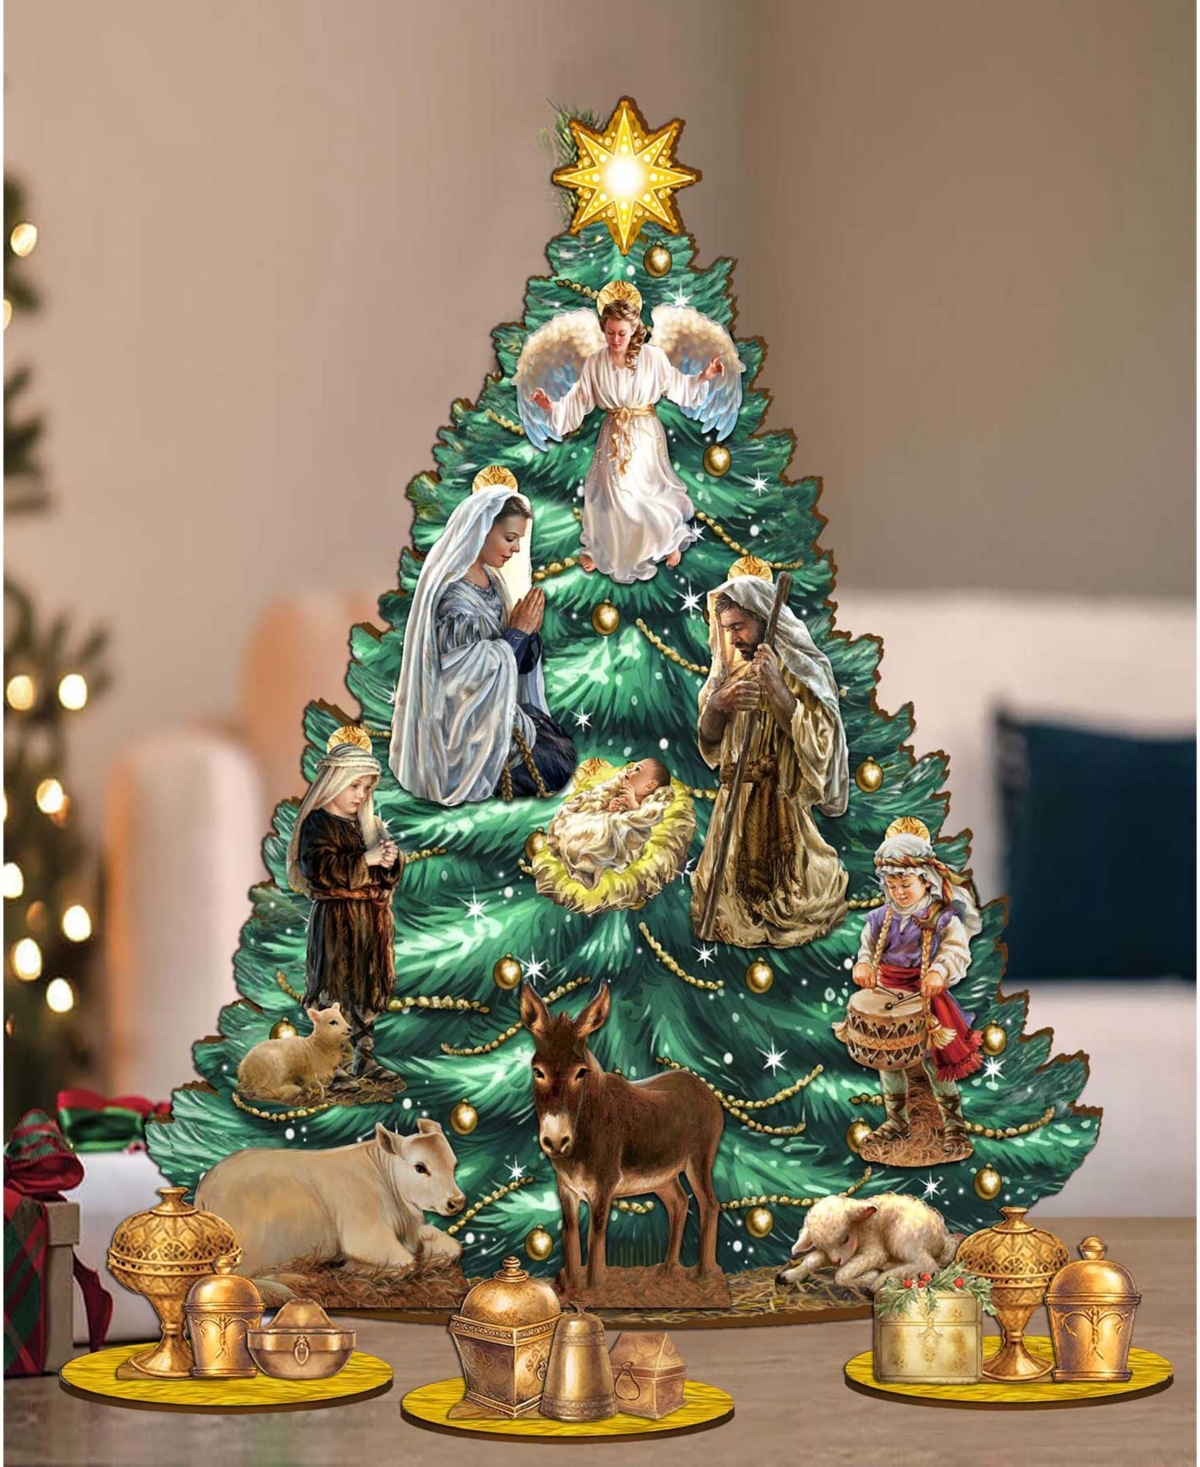 Shop Designocracy Nativity Themed Wooden Christmas Tree With Ornaments Set Of 13 G. Debrekht In Multi Color